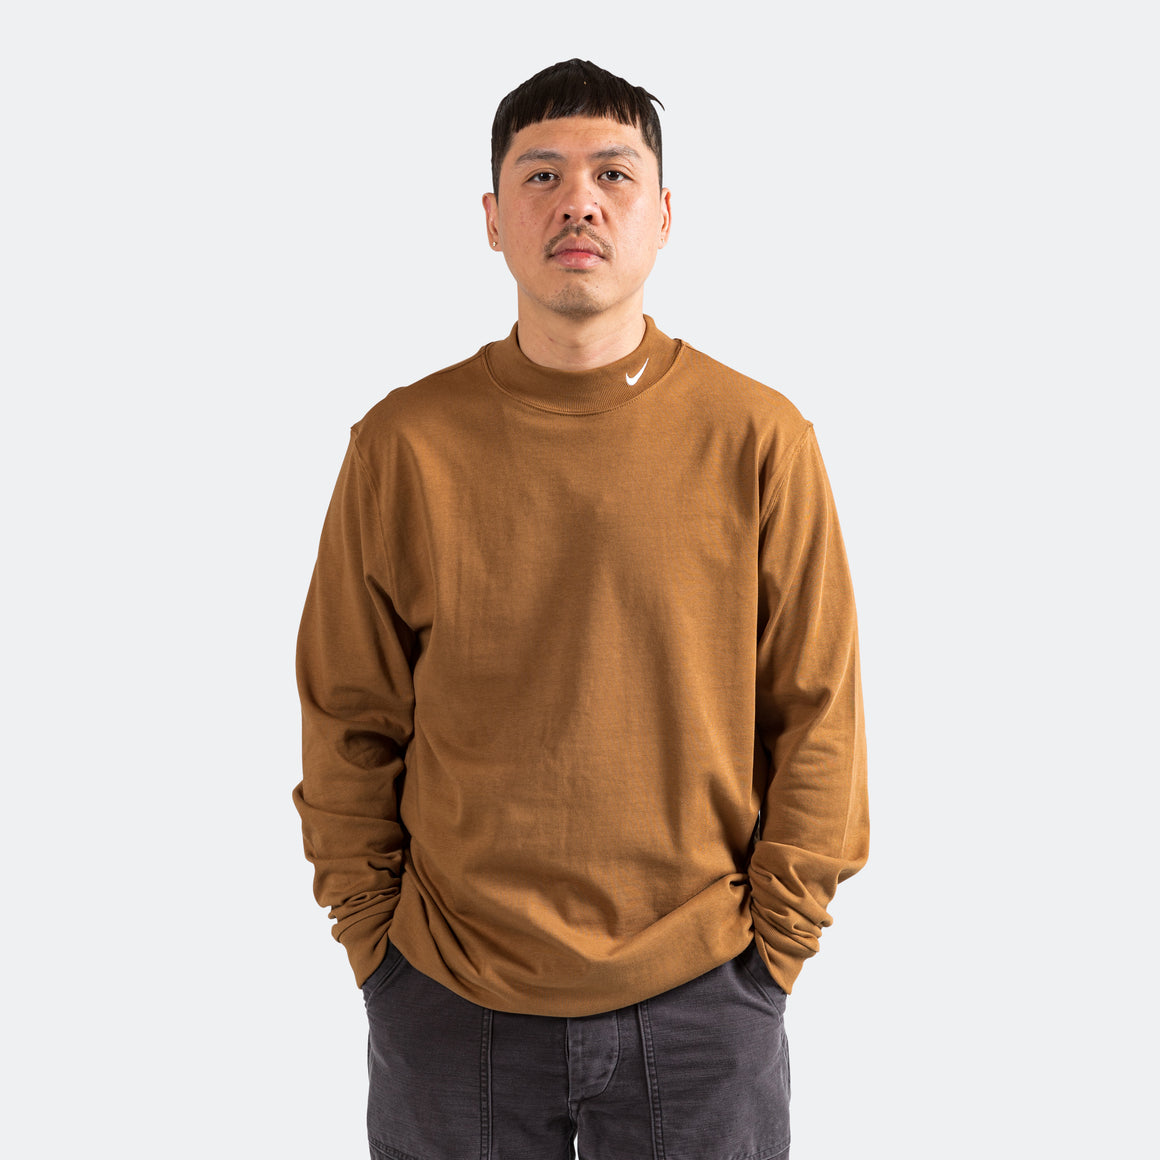 Nike - Nike Life Mock Neck LS Shirt - Ale Brown/White - UP THERE